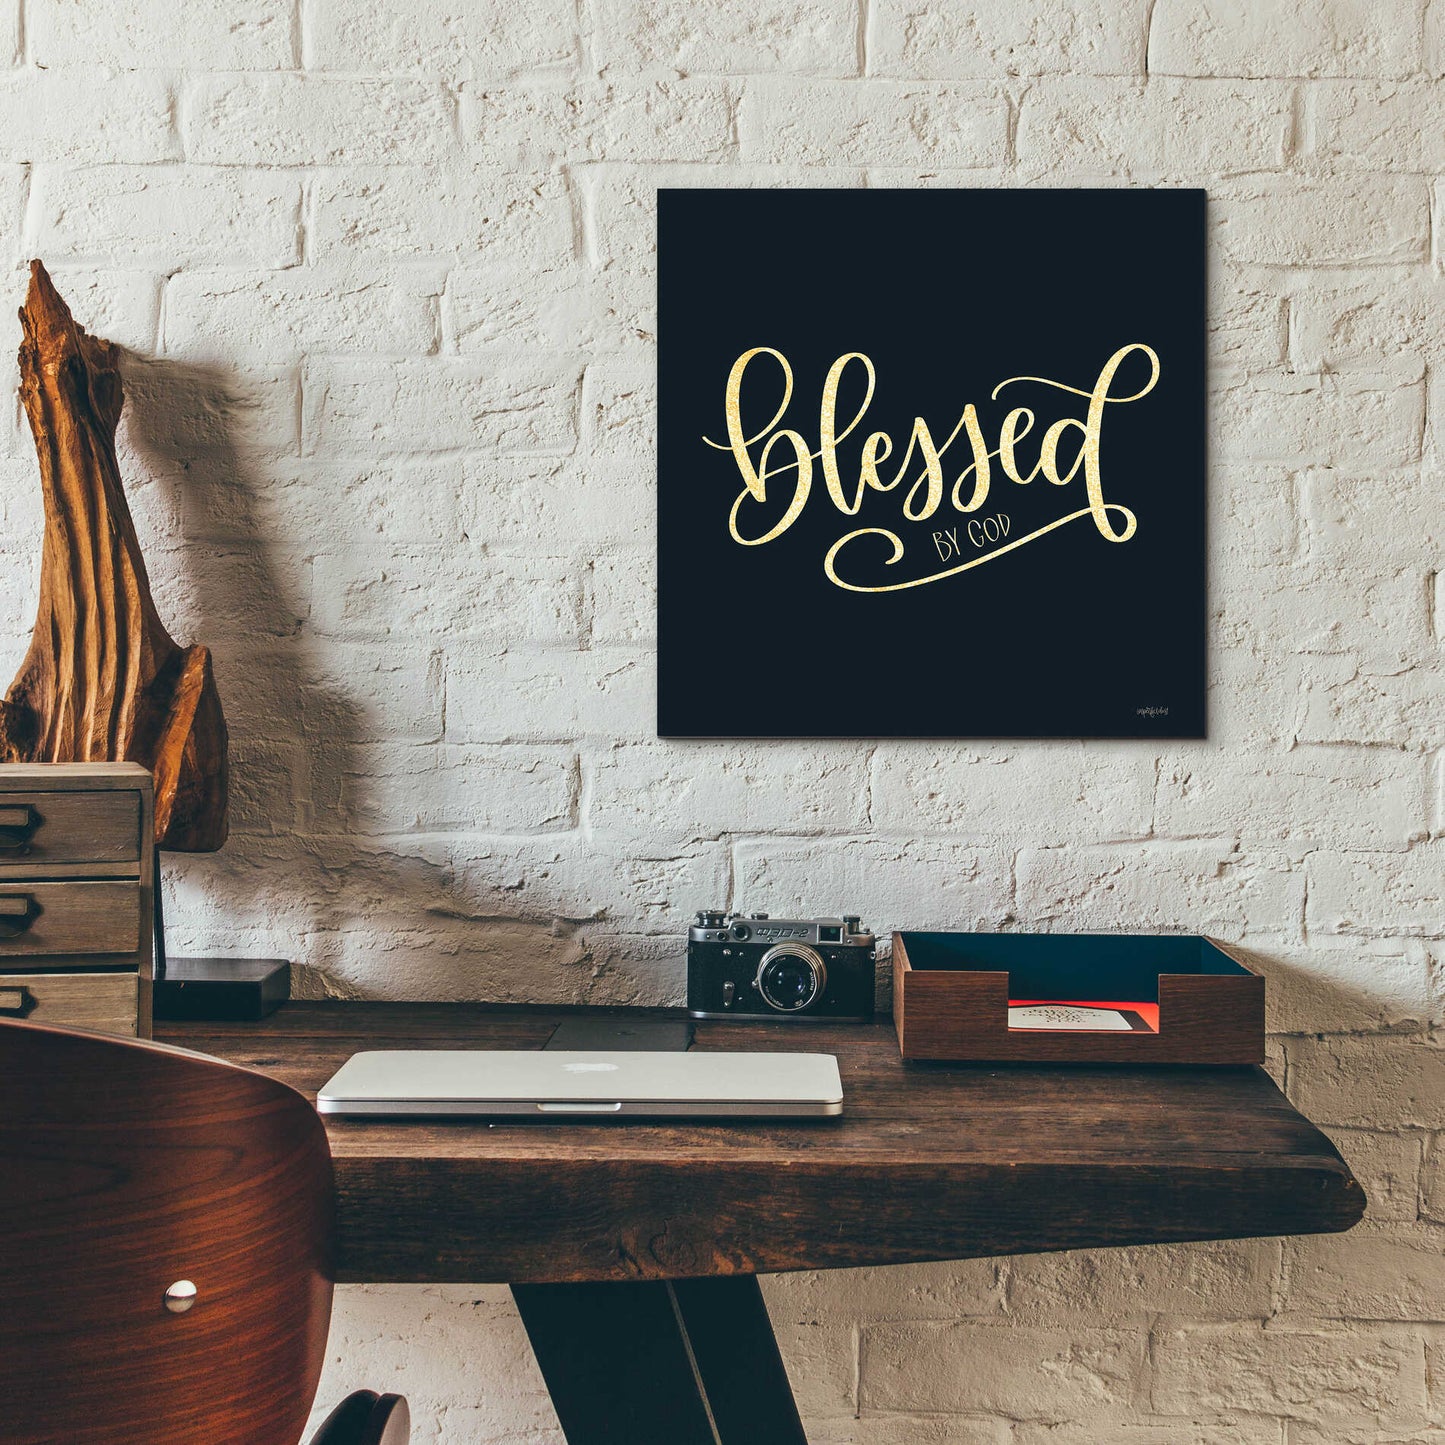 Epic Art 'Blessed By God' by Imperfect Dust, Acrylic Glass Wall Art,12x12